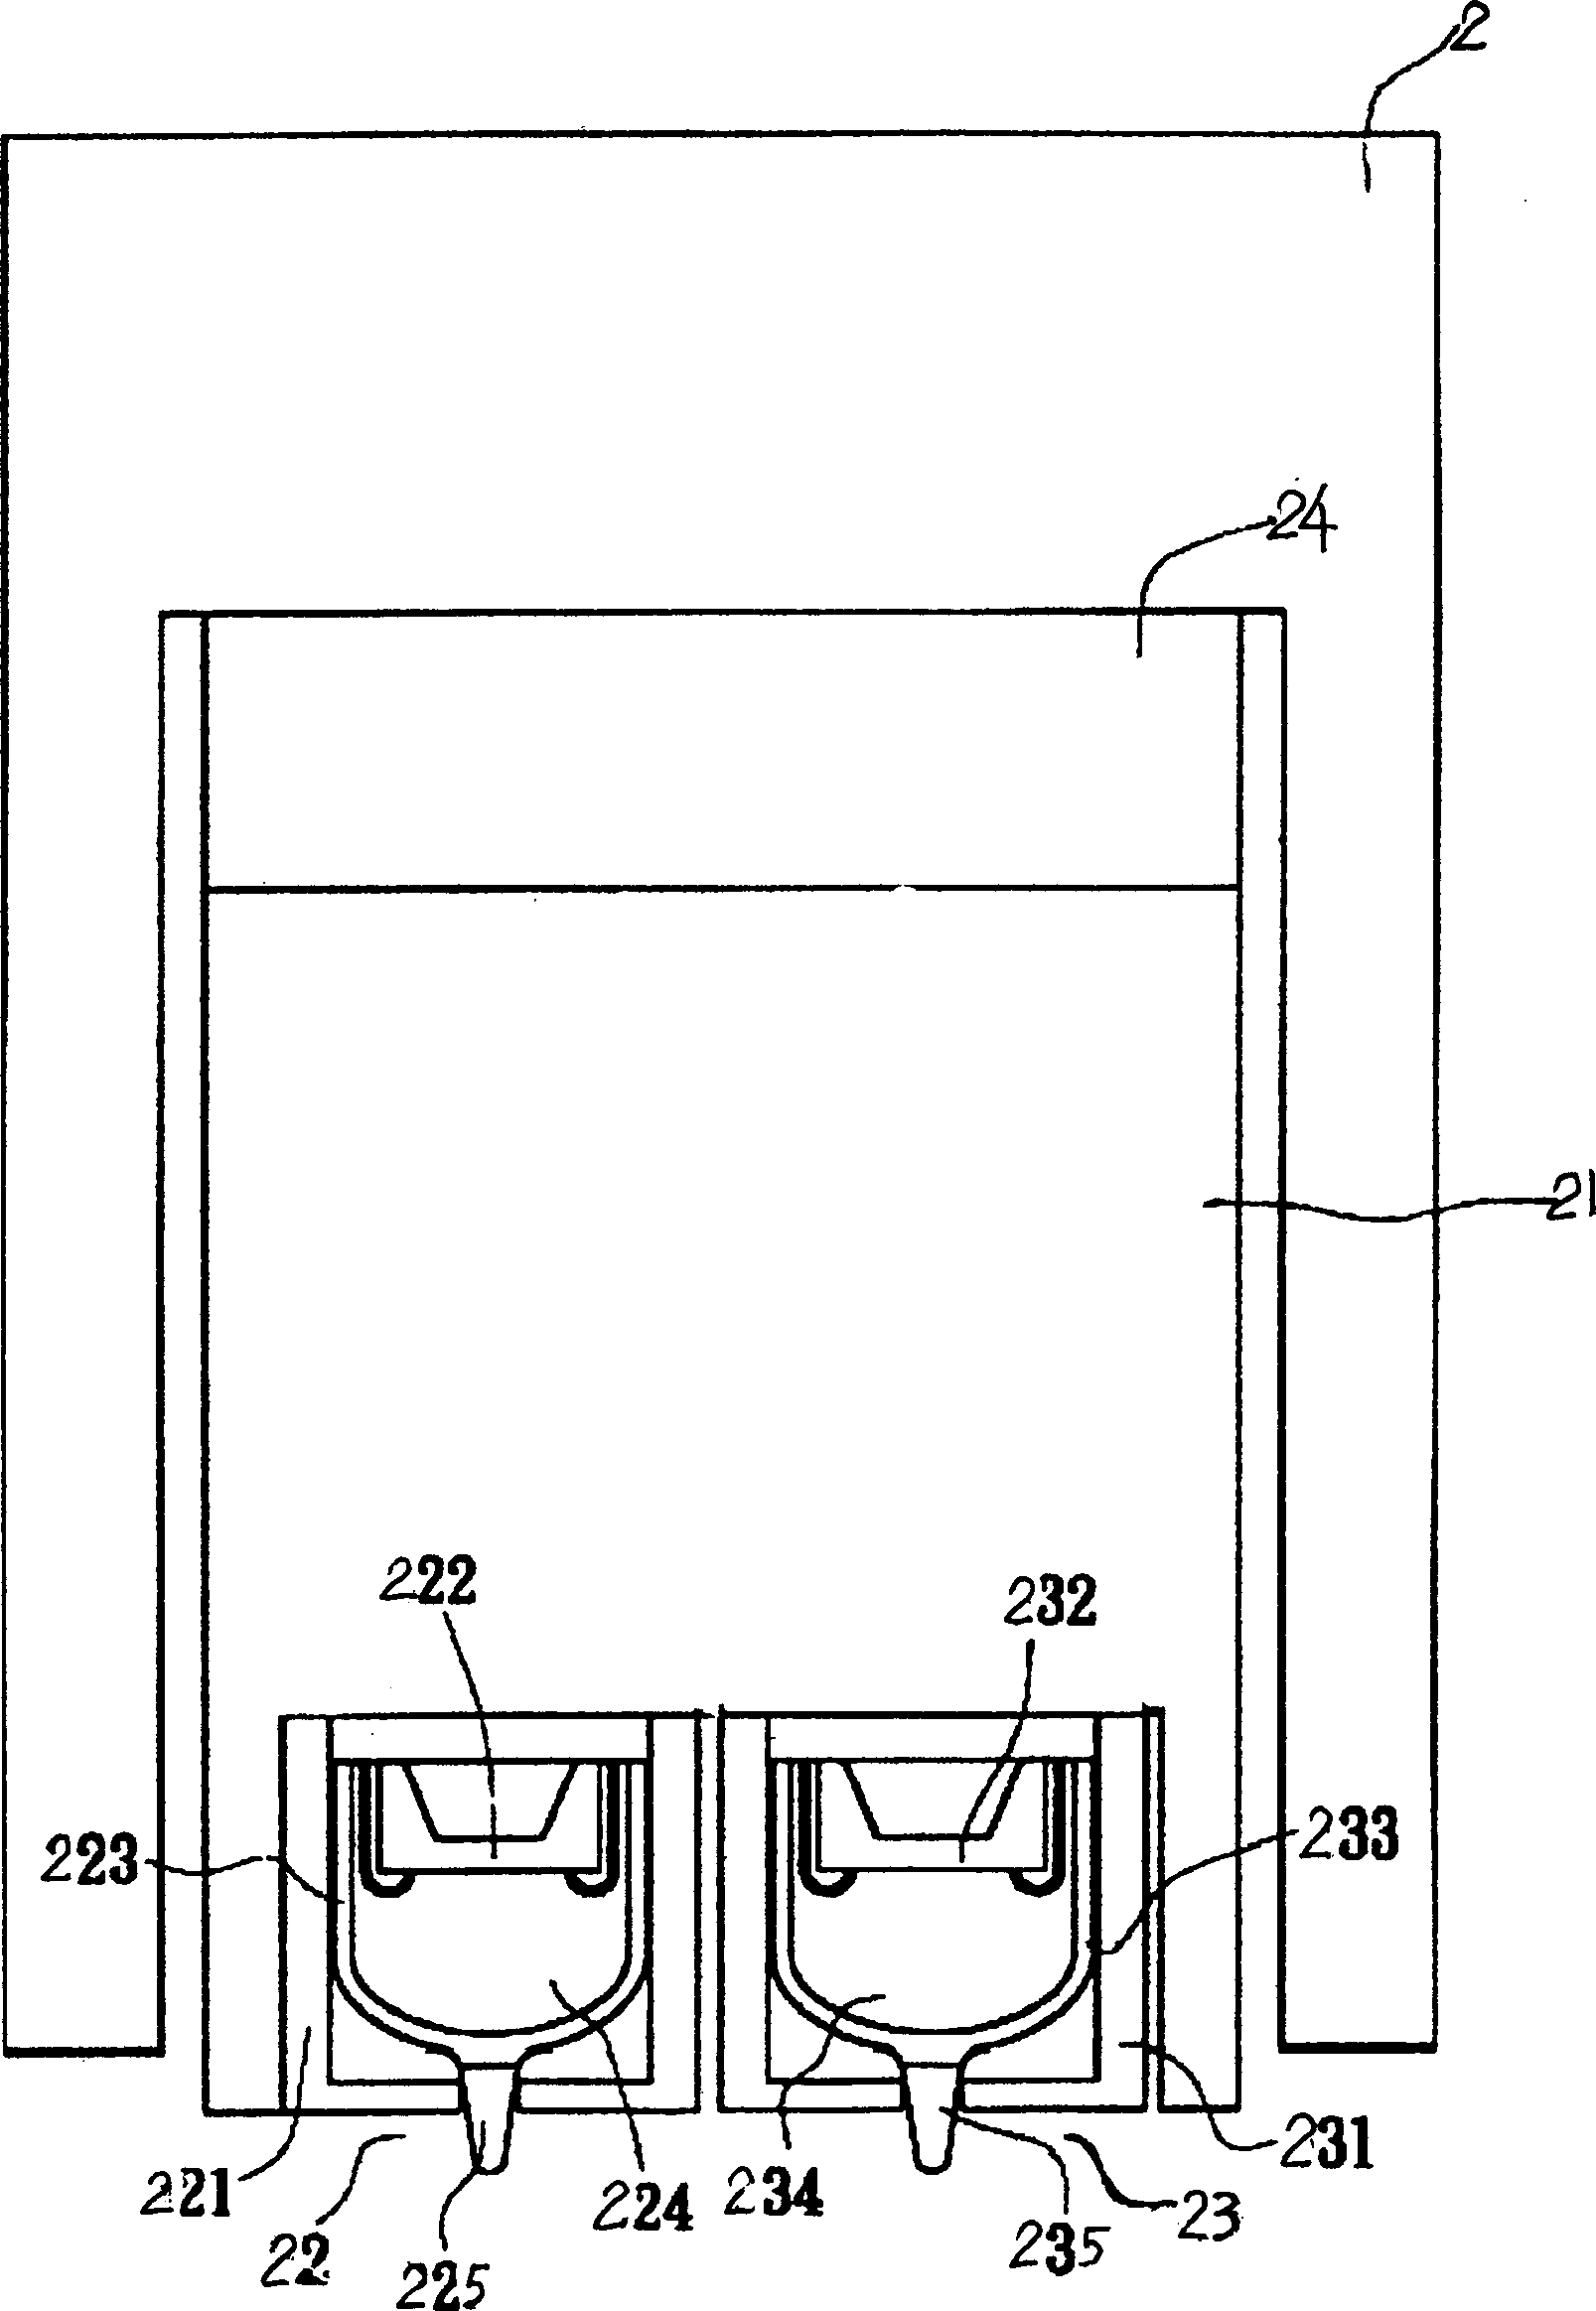 Method and equipment for measuring pulse pressure at adjacent points